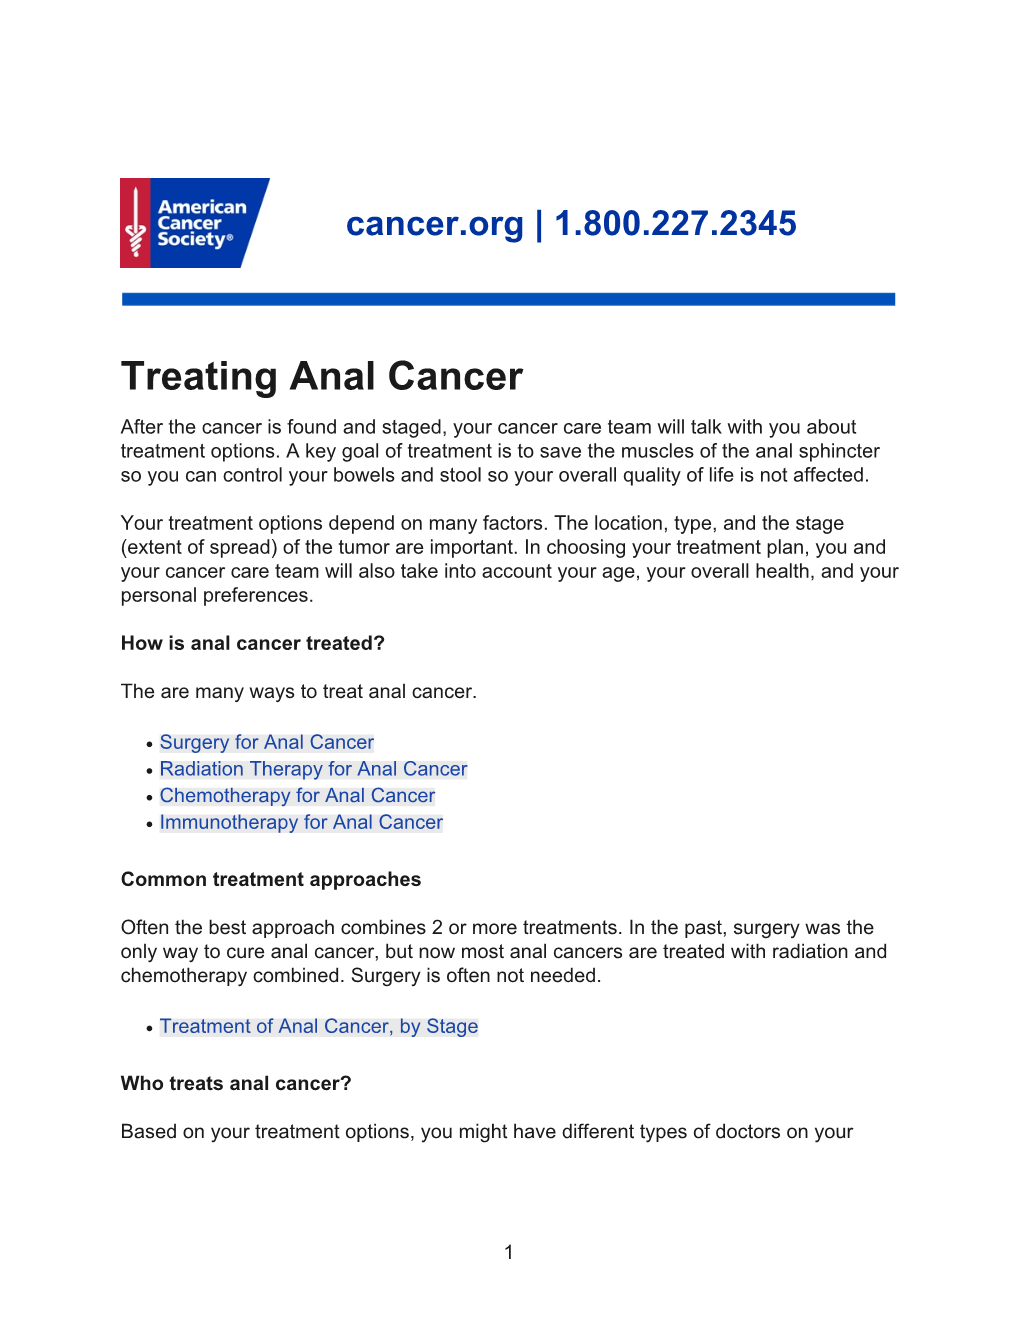 Treating Anal Cancer After the Cancer Is Found and Staged, Your Cancer Care Team Will Talk with You About Treatment Options